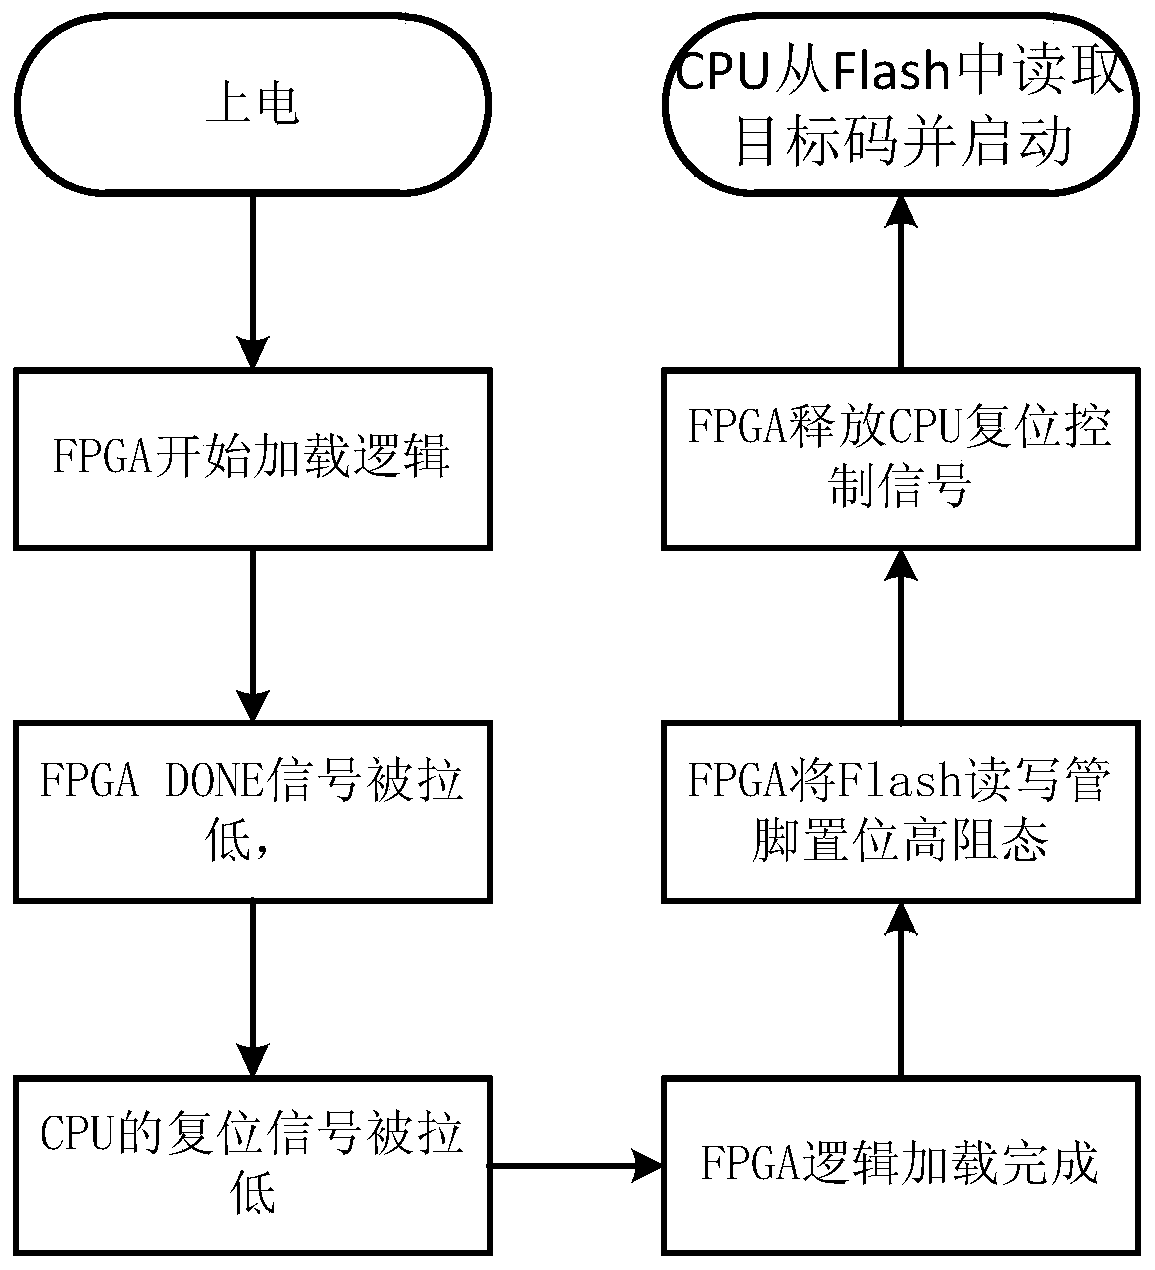 Remote online upgrading method for embedded system containing CPU and FPGA